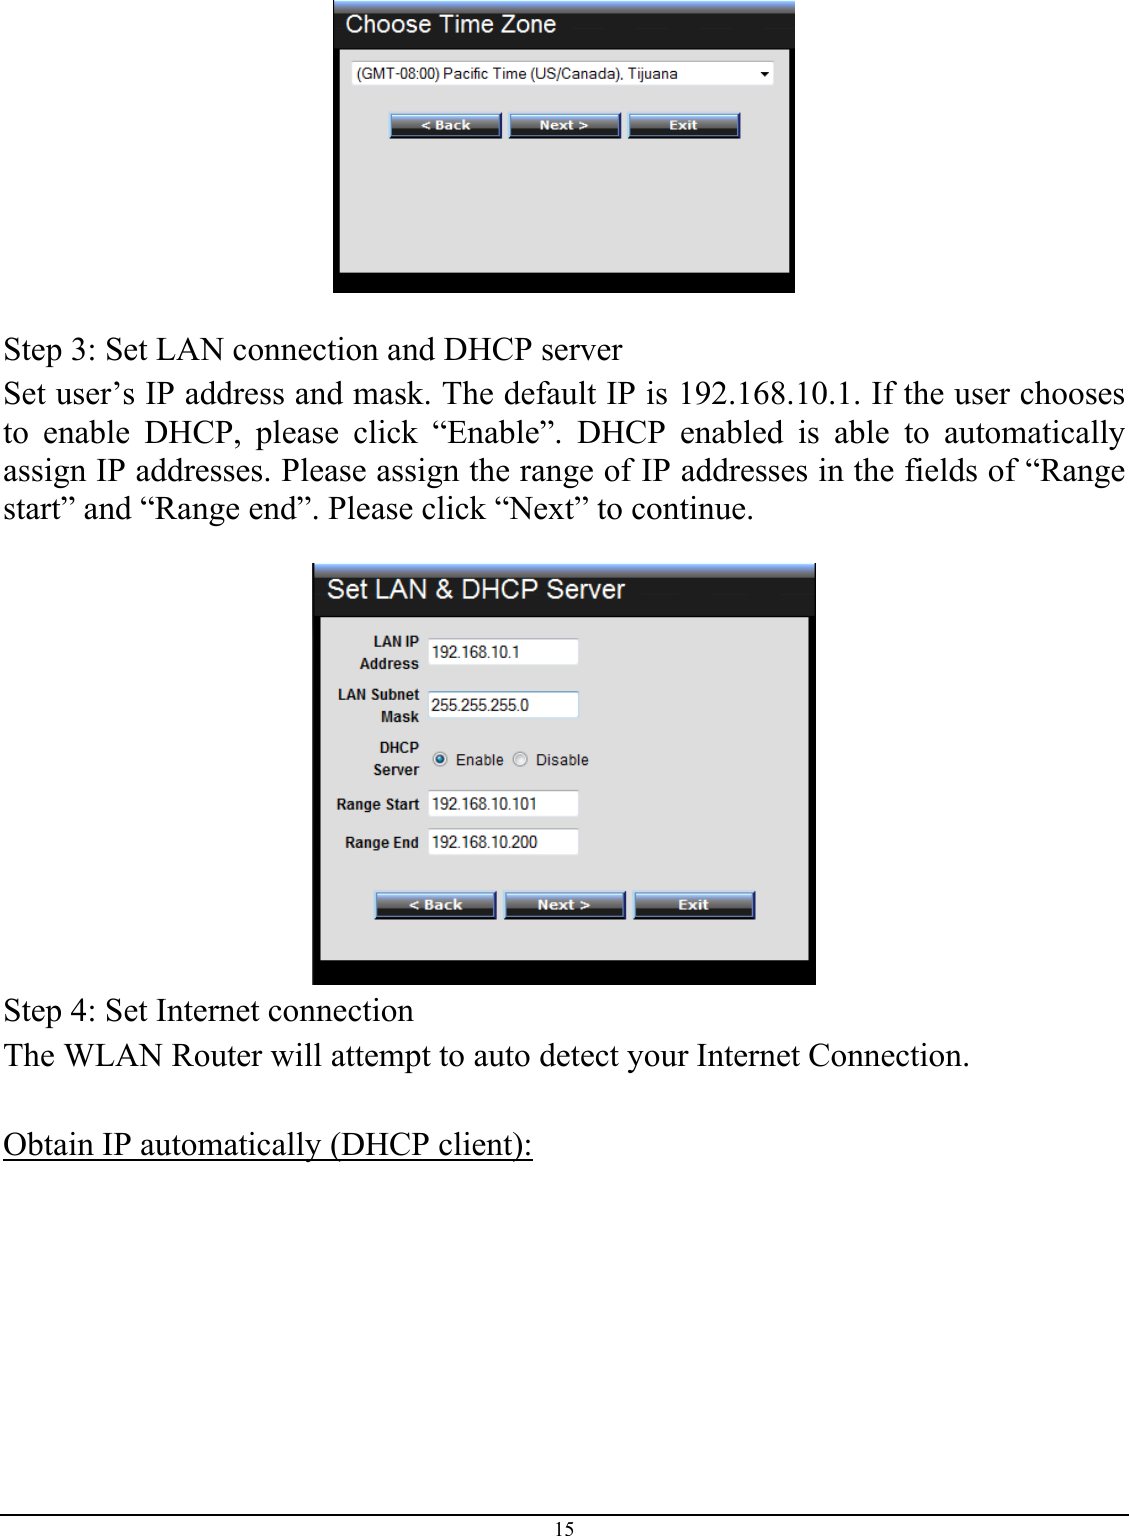 15    Step 3: Set LAN connection and DHCP server Set user’s IP address and mask. The default IP is 192.168.10.1. If the user chooses to enable DHCP, please click “Enable”. DHCP enabled is able to automatically assign IP addresses. Please assign the range of IP addresses in the fields of “Range start” and “Range end”. Please click “Next” to continue.   Step 4: Set Internet connection The WLAN Router will attempt to auto detect your Internet Connection.  Obtain IP automatically (DHCP client):  